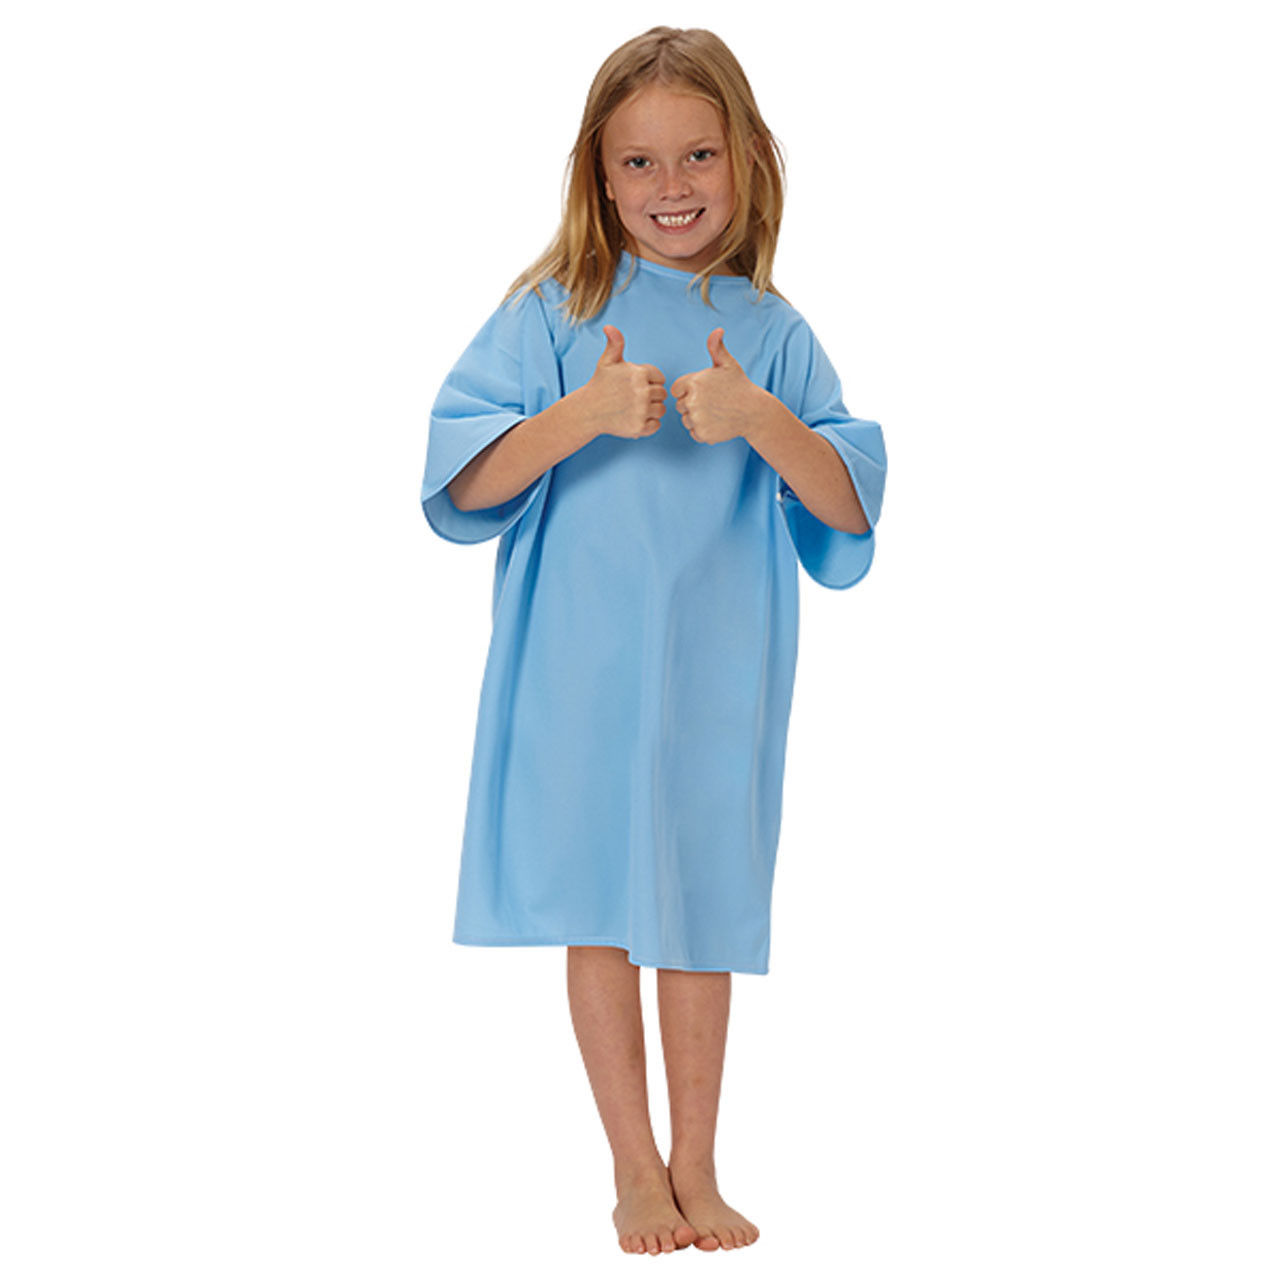 Pediatric Hospital Gown, Blue - In Bulk Case of 12 or 72 Questions & Answers